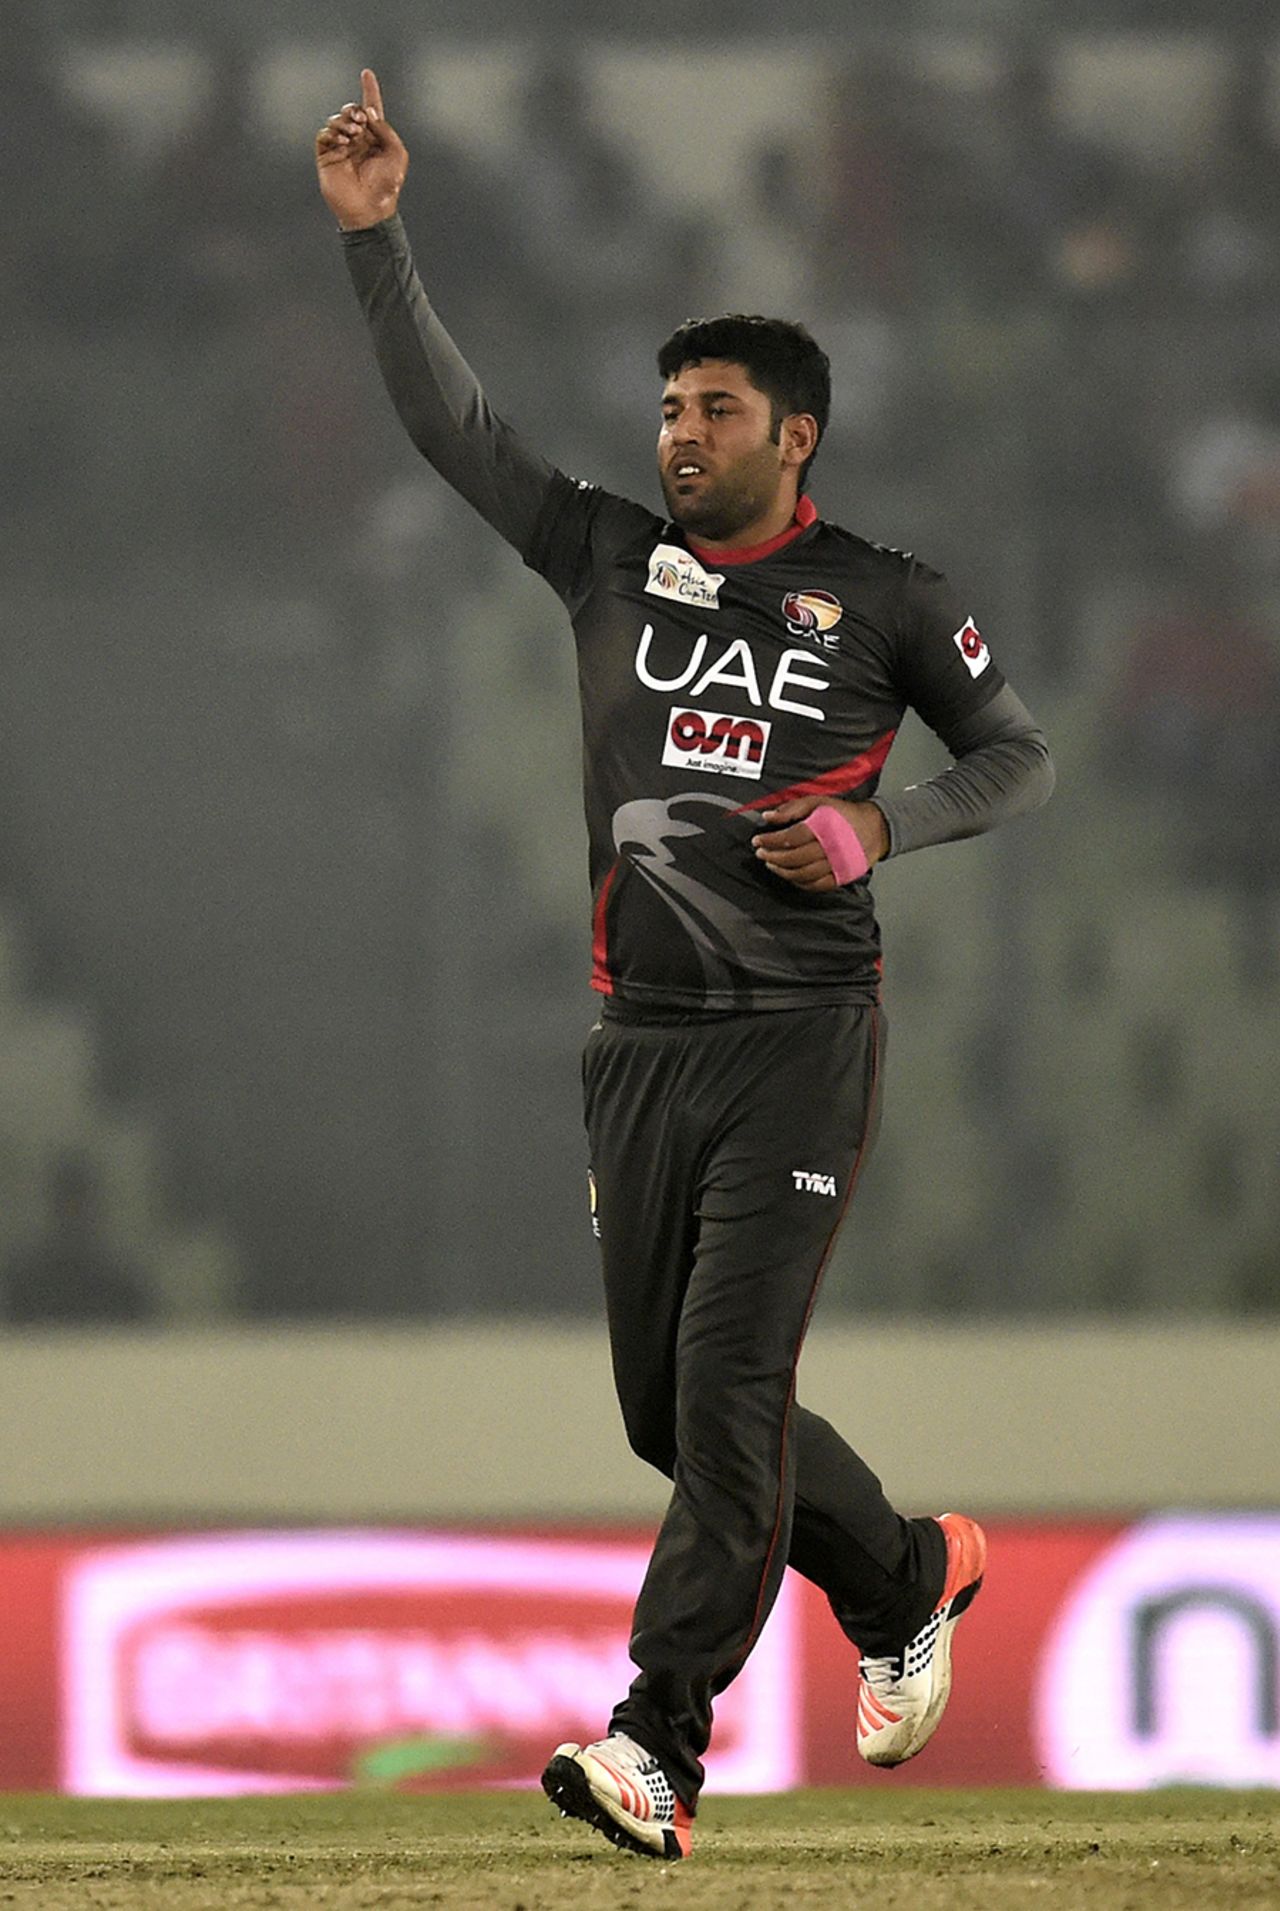 Mohammad Naveed finished with economical returns of 2 for 12, Bangladesh v UAE, Asia Cup 2016, Mirpur, February 26, 2016